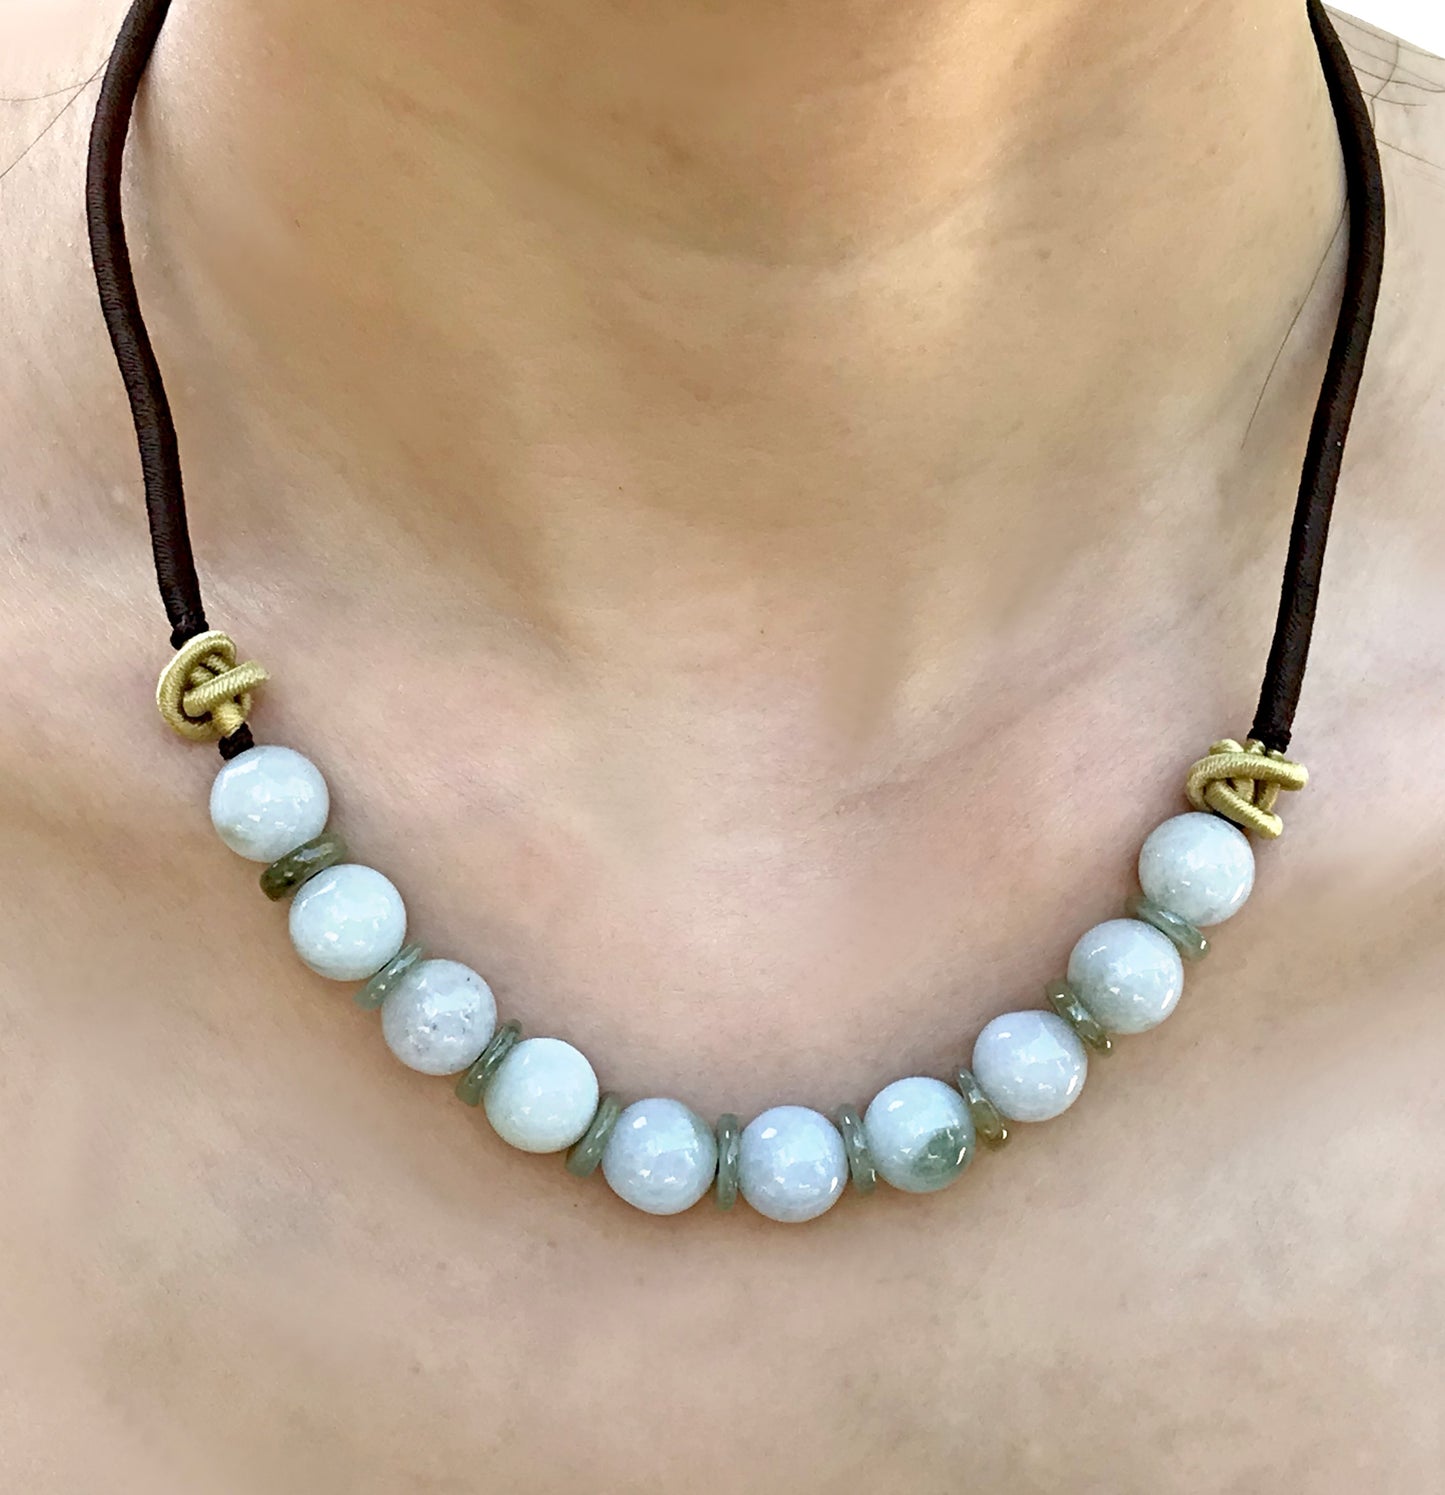 Get Closer to Nature with the PI Symbol and Jade Beads Necklace made with Black Cord